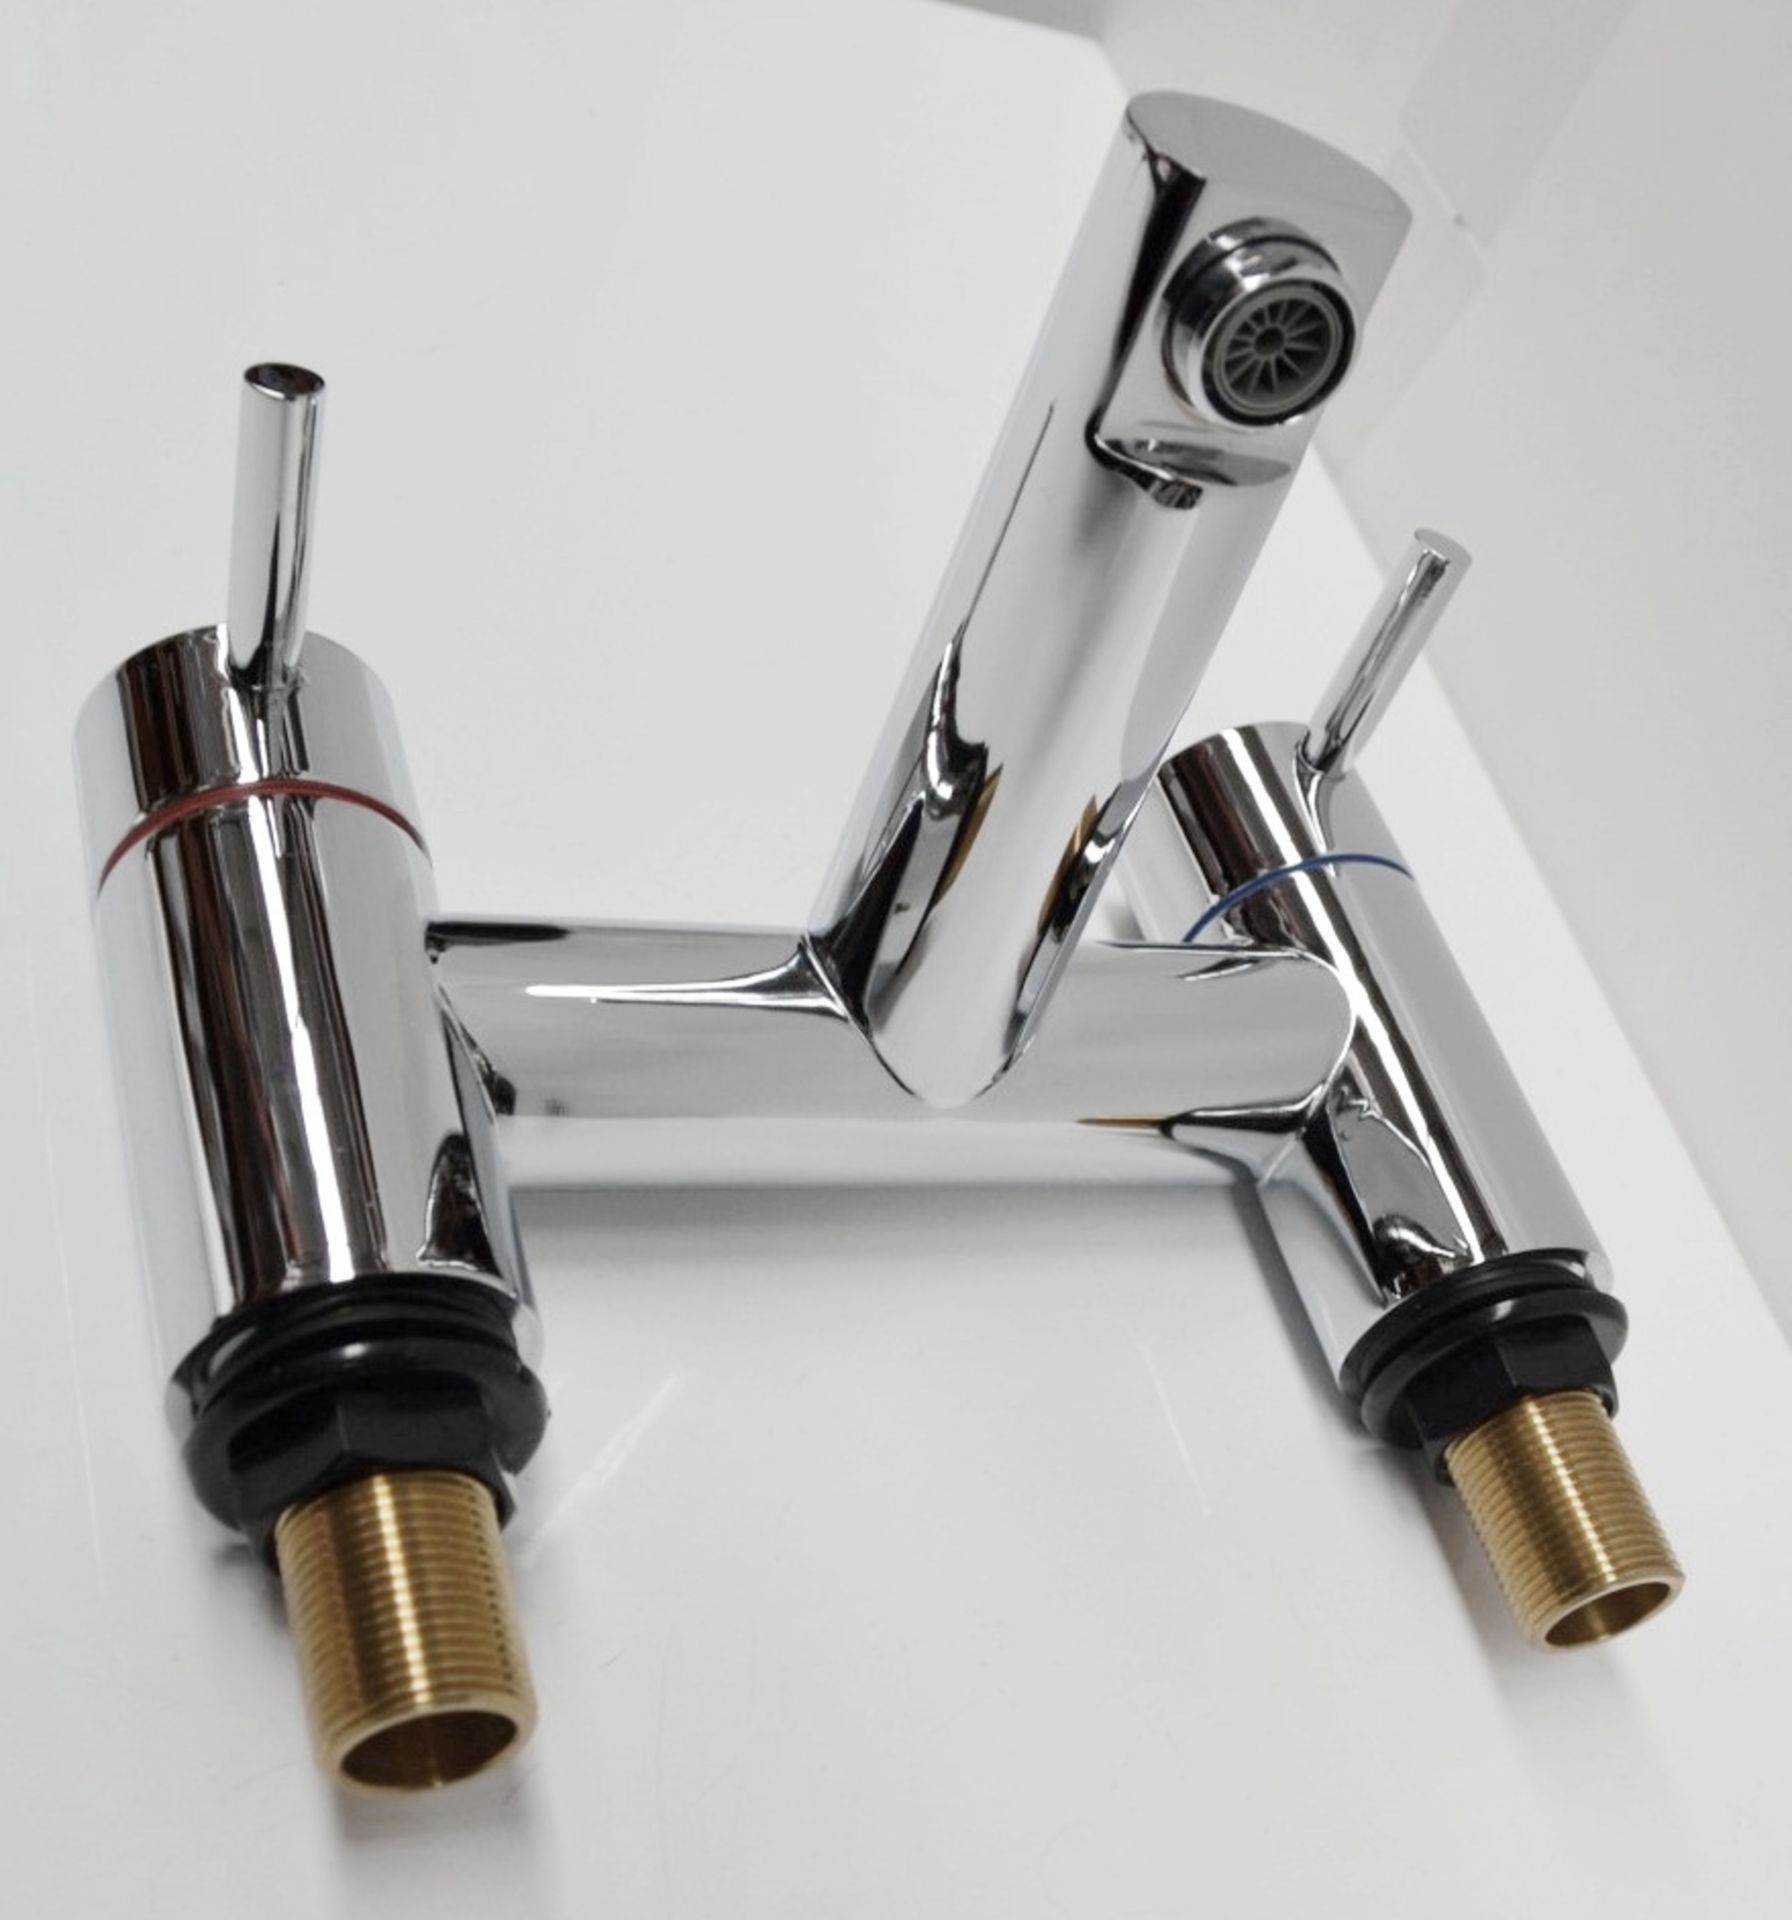 1 x Matrix Bath Mixer Tap - Featuring Modern Style With A Round Shape - Ref: MBI028 - CL190 - Unused - Image 3 of 4